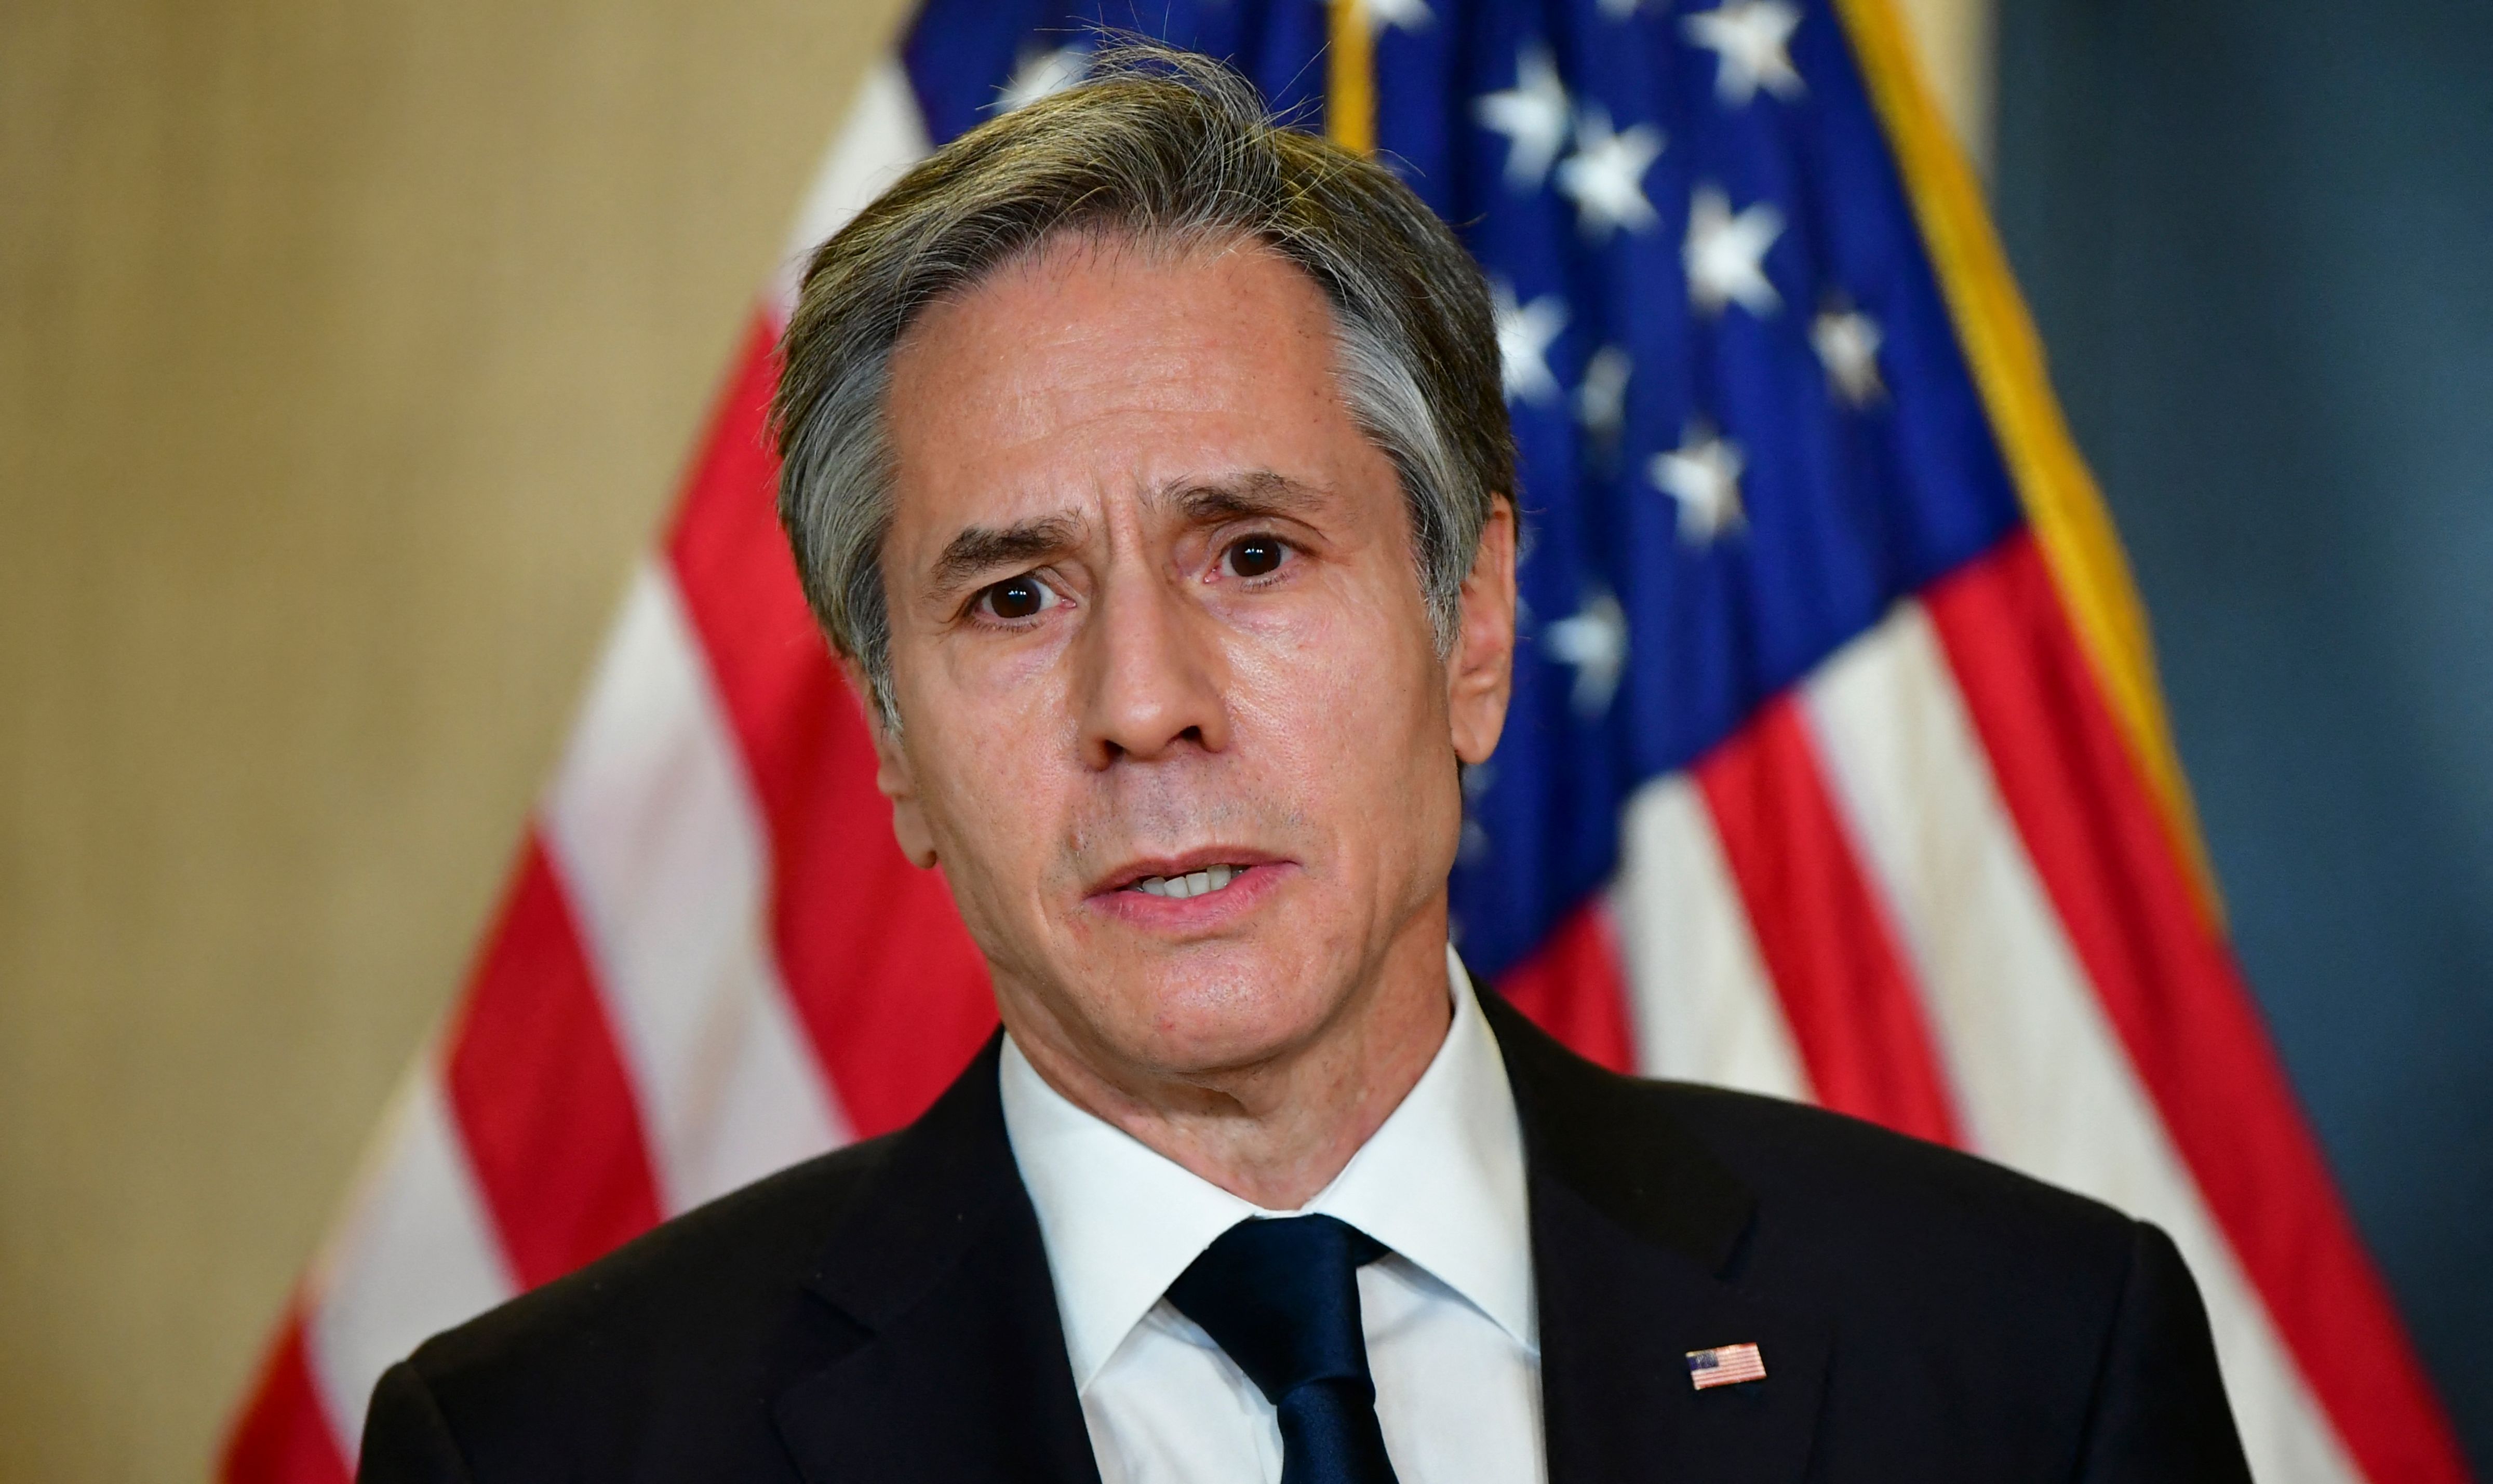 US Secretary of State Antony Blinken said the coordinated Western action against China sent 'a strong signal to those who violate or abuse human rights'.